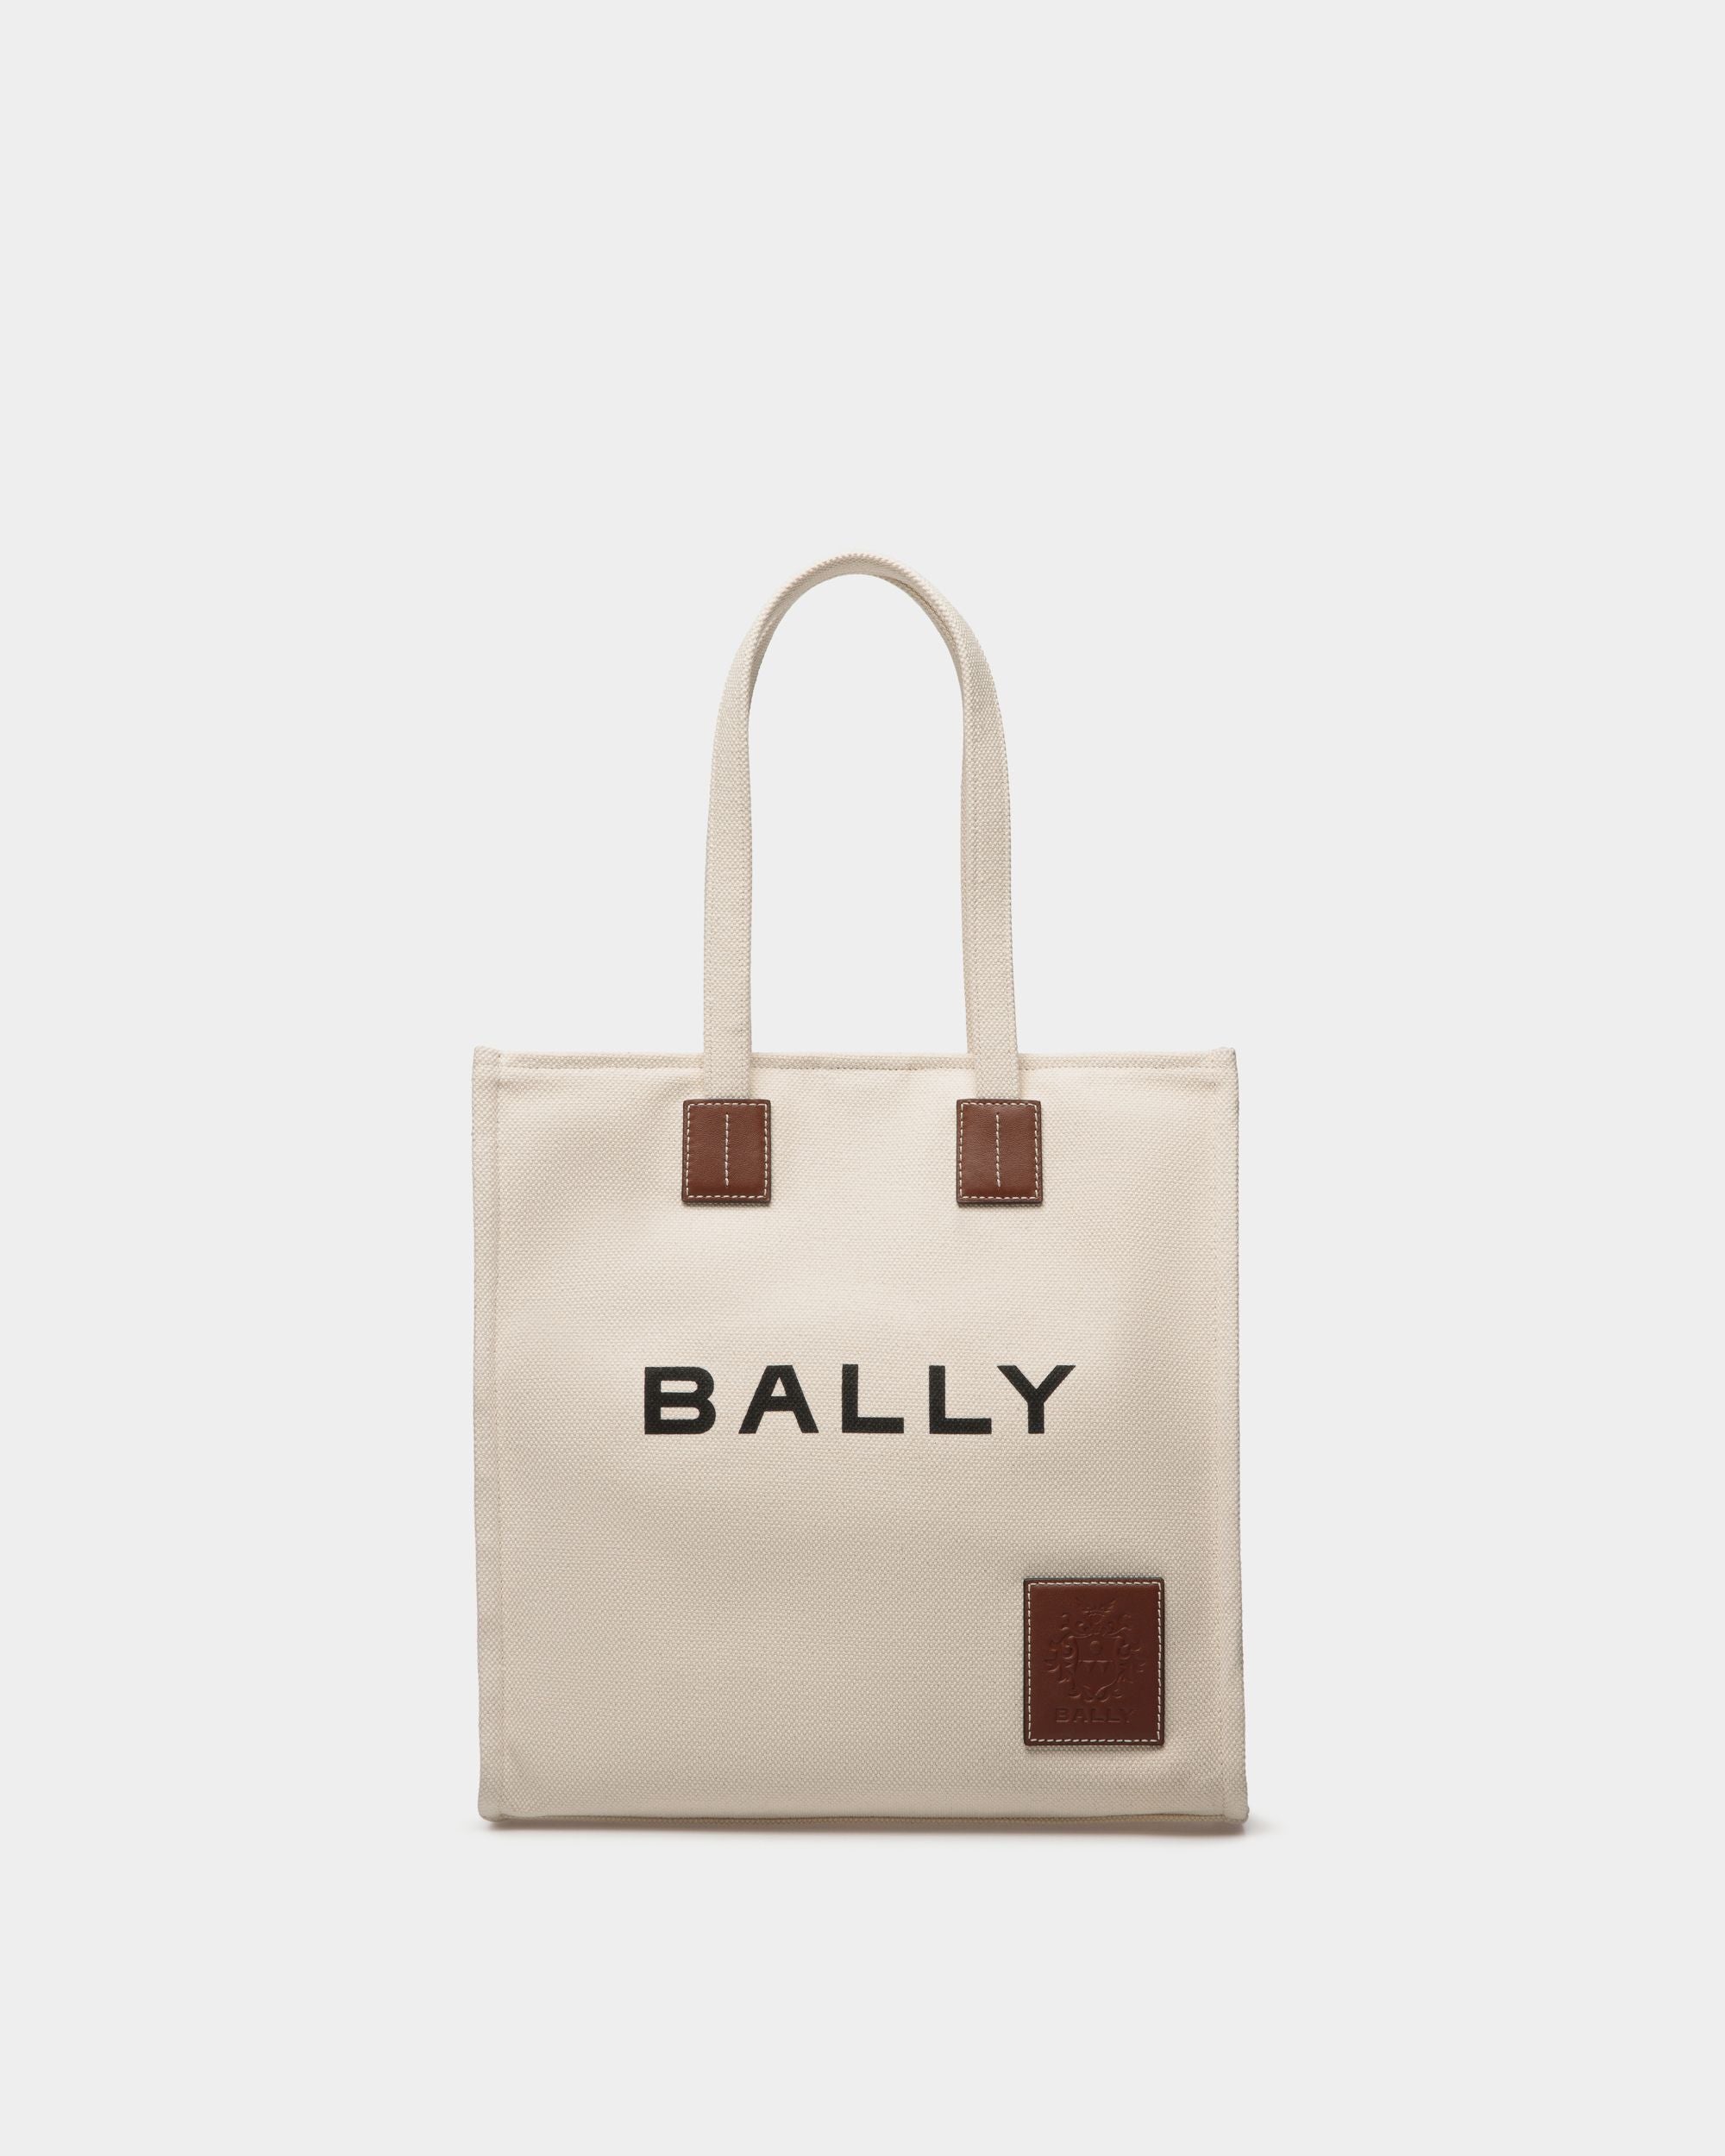 Akelei | Women's Tote Bag in Neutral Canvas | Bally | Still Life Front